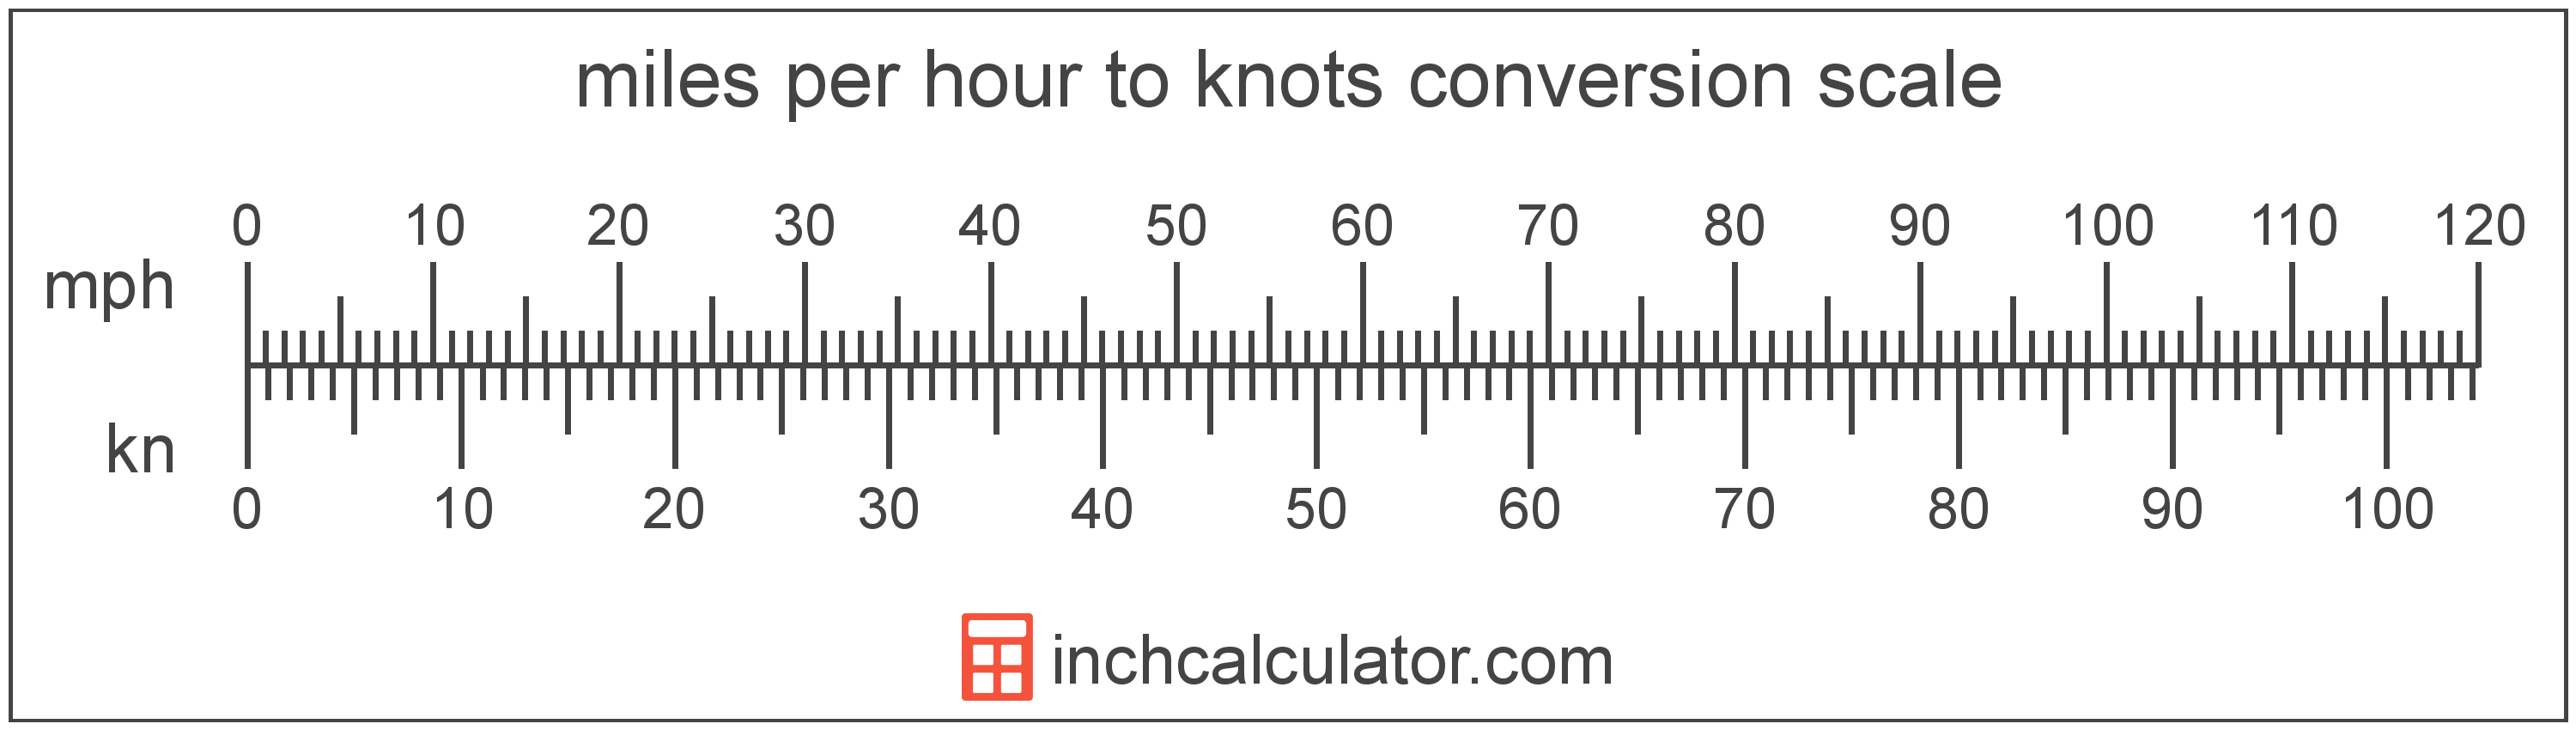 conversion scale showing miles per hour and equivalent knots speed values